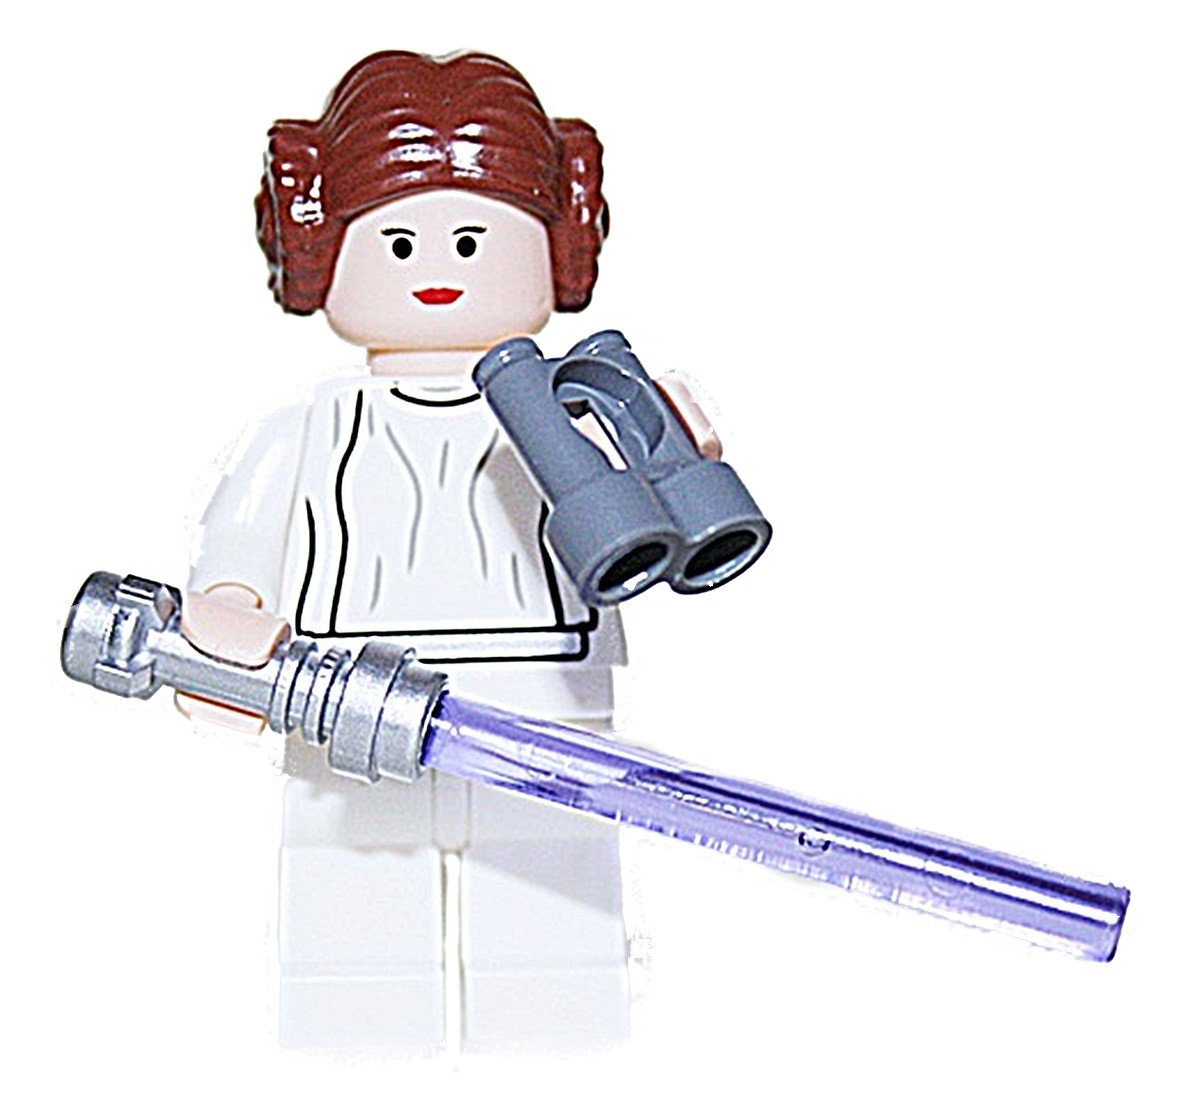 Lego Star Wars Princess Leia Figure With Lightsaber Purple And White Suit B